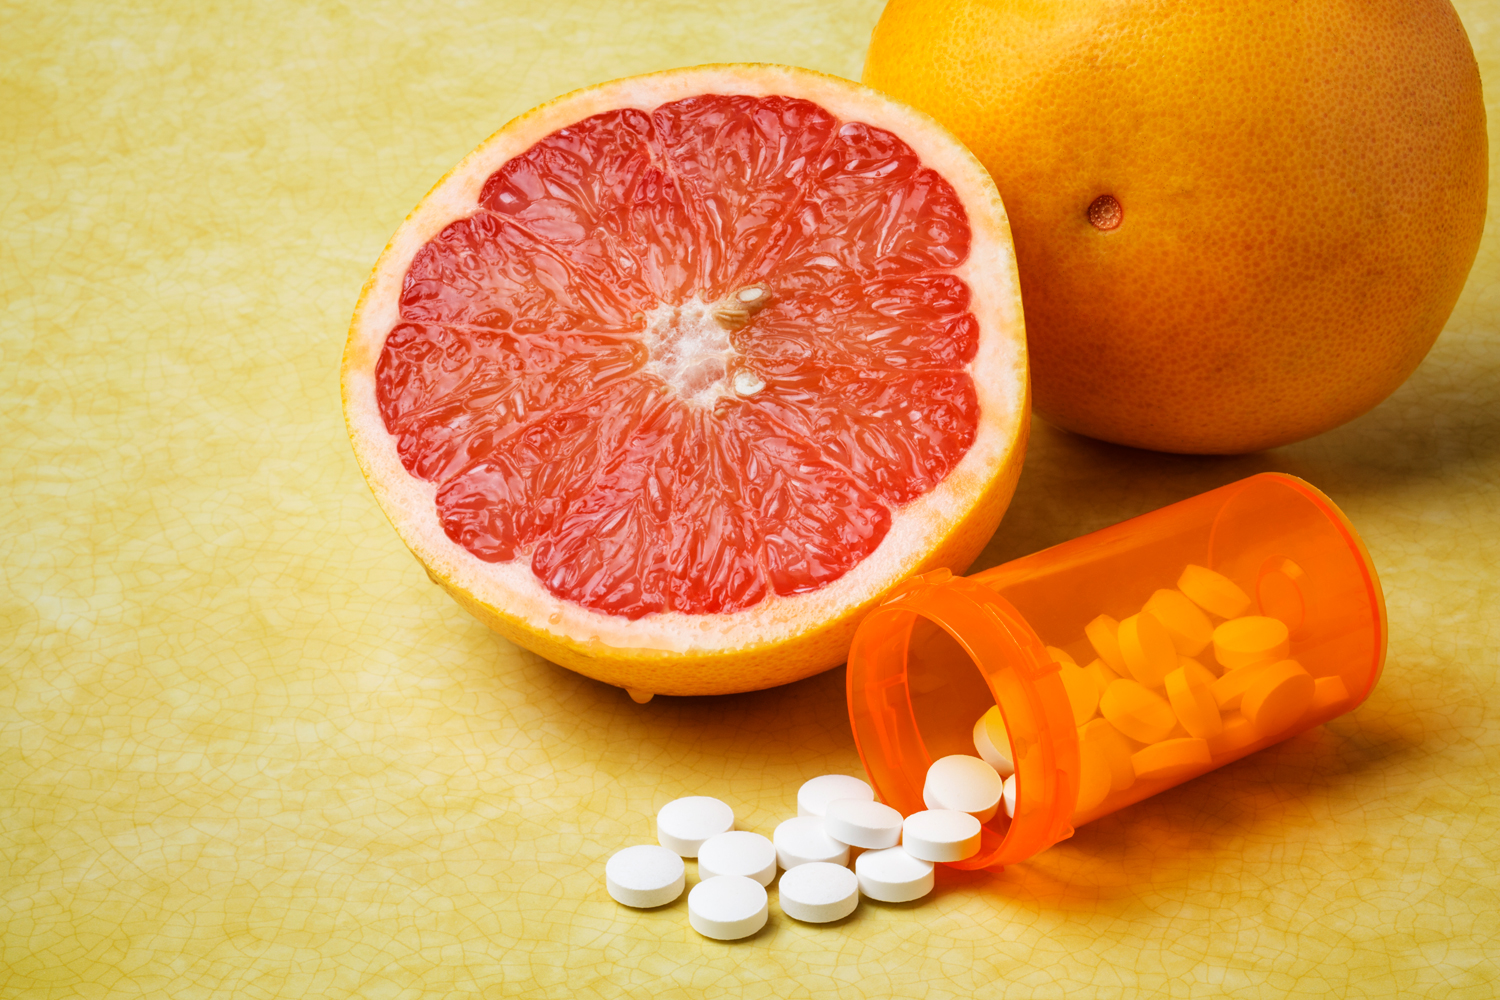 Grapefruit: The Healthy Fruit With a Potentially Dangerous Downside